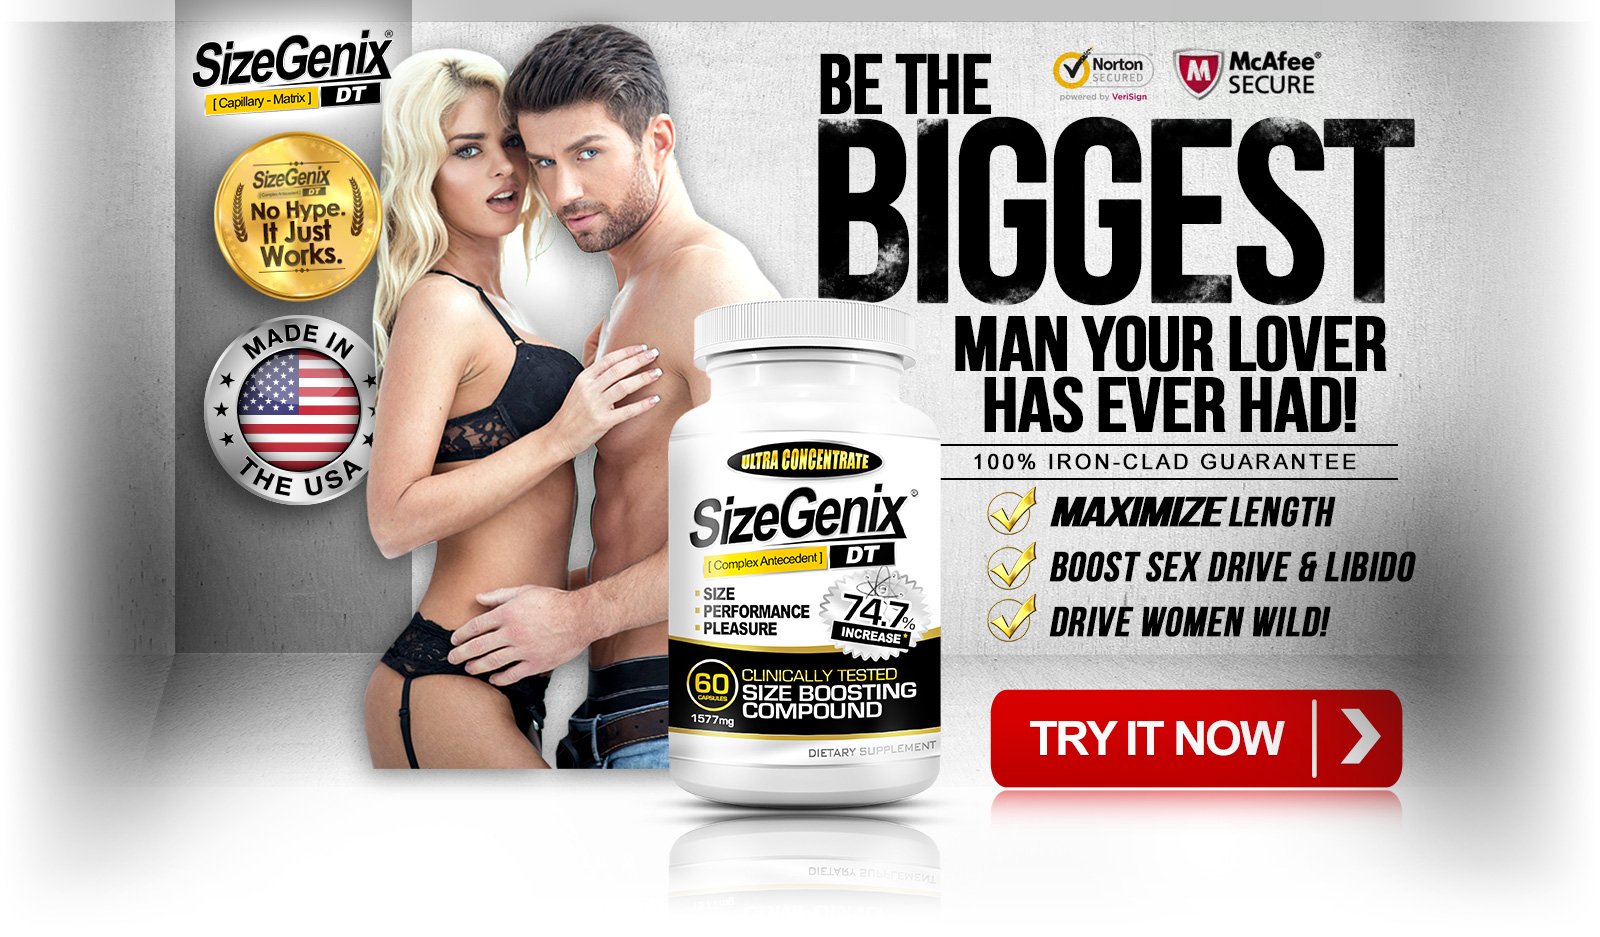 SizeGenix - Be The Biggest Man Your Lover Has Ever Had!